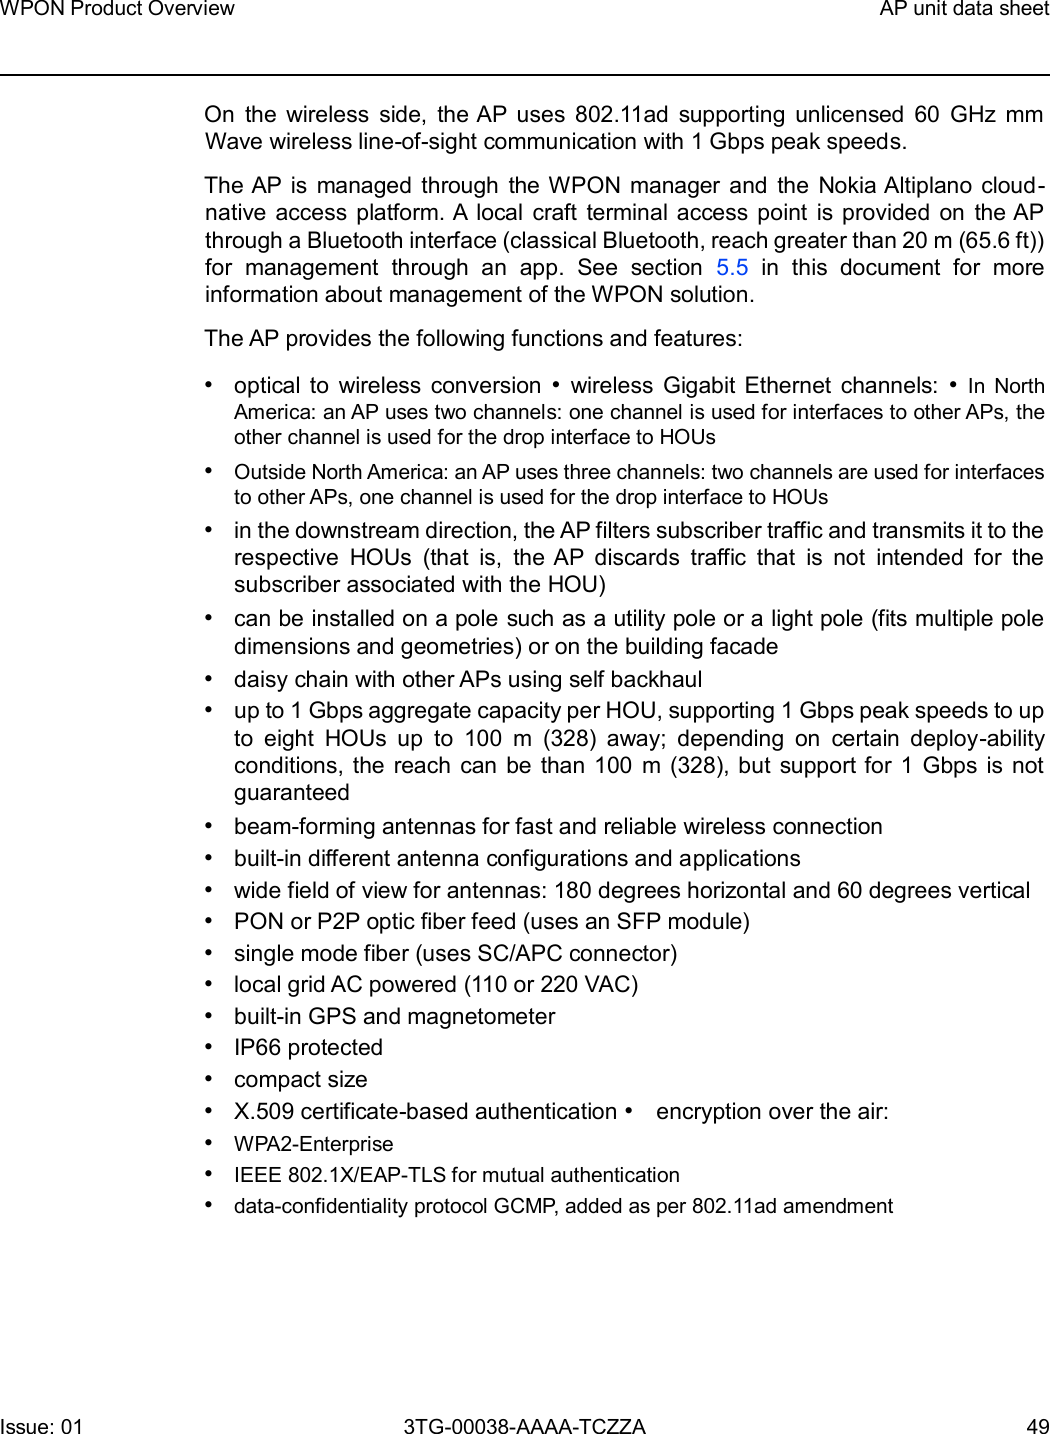 Page 49 of Nokia Bell 7577WPONAPAC WPON User Manual WPON Product Overview